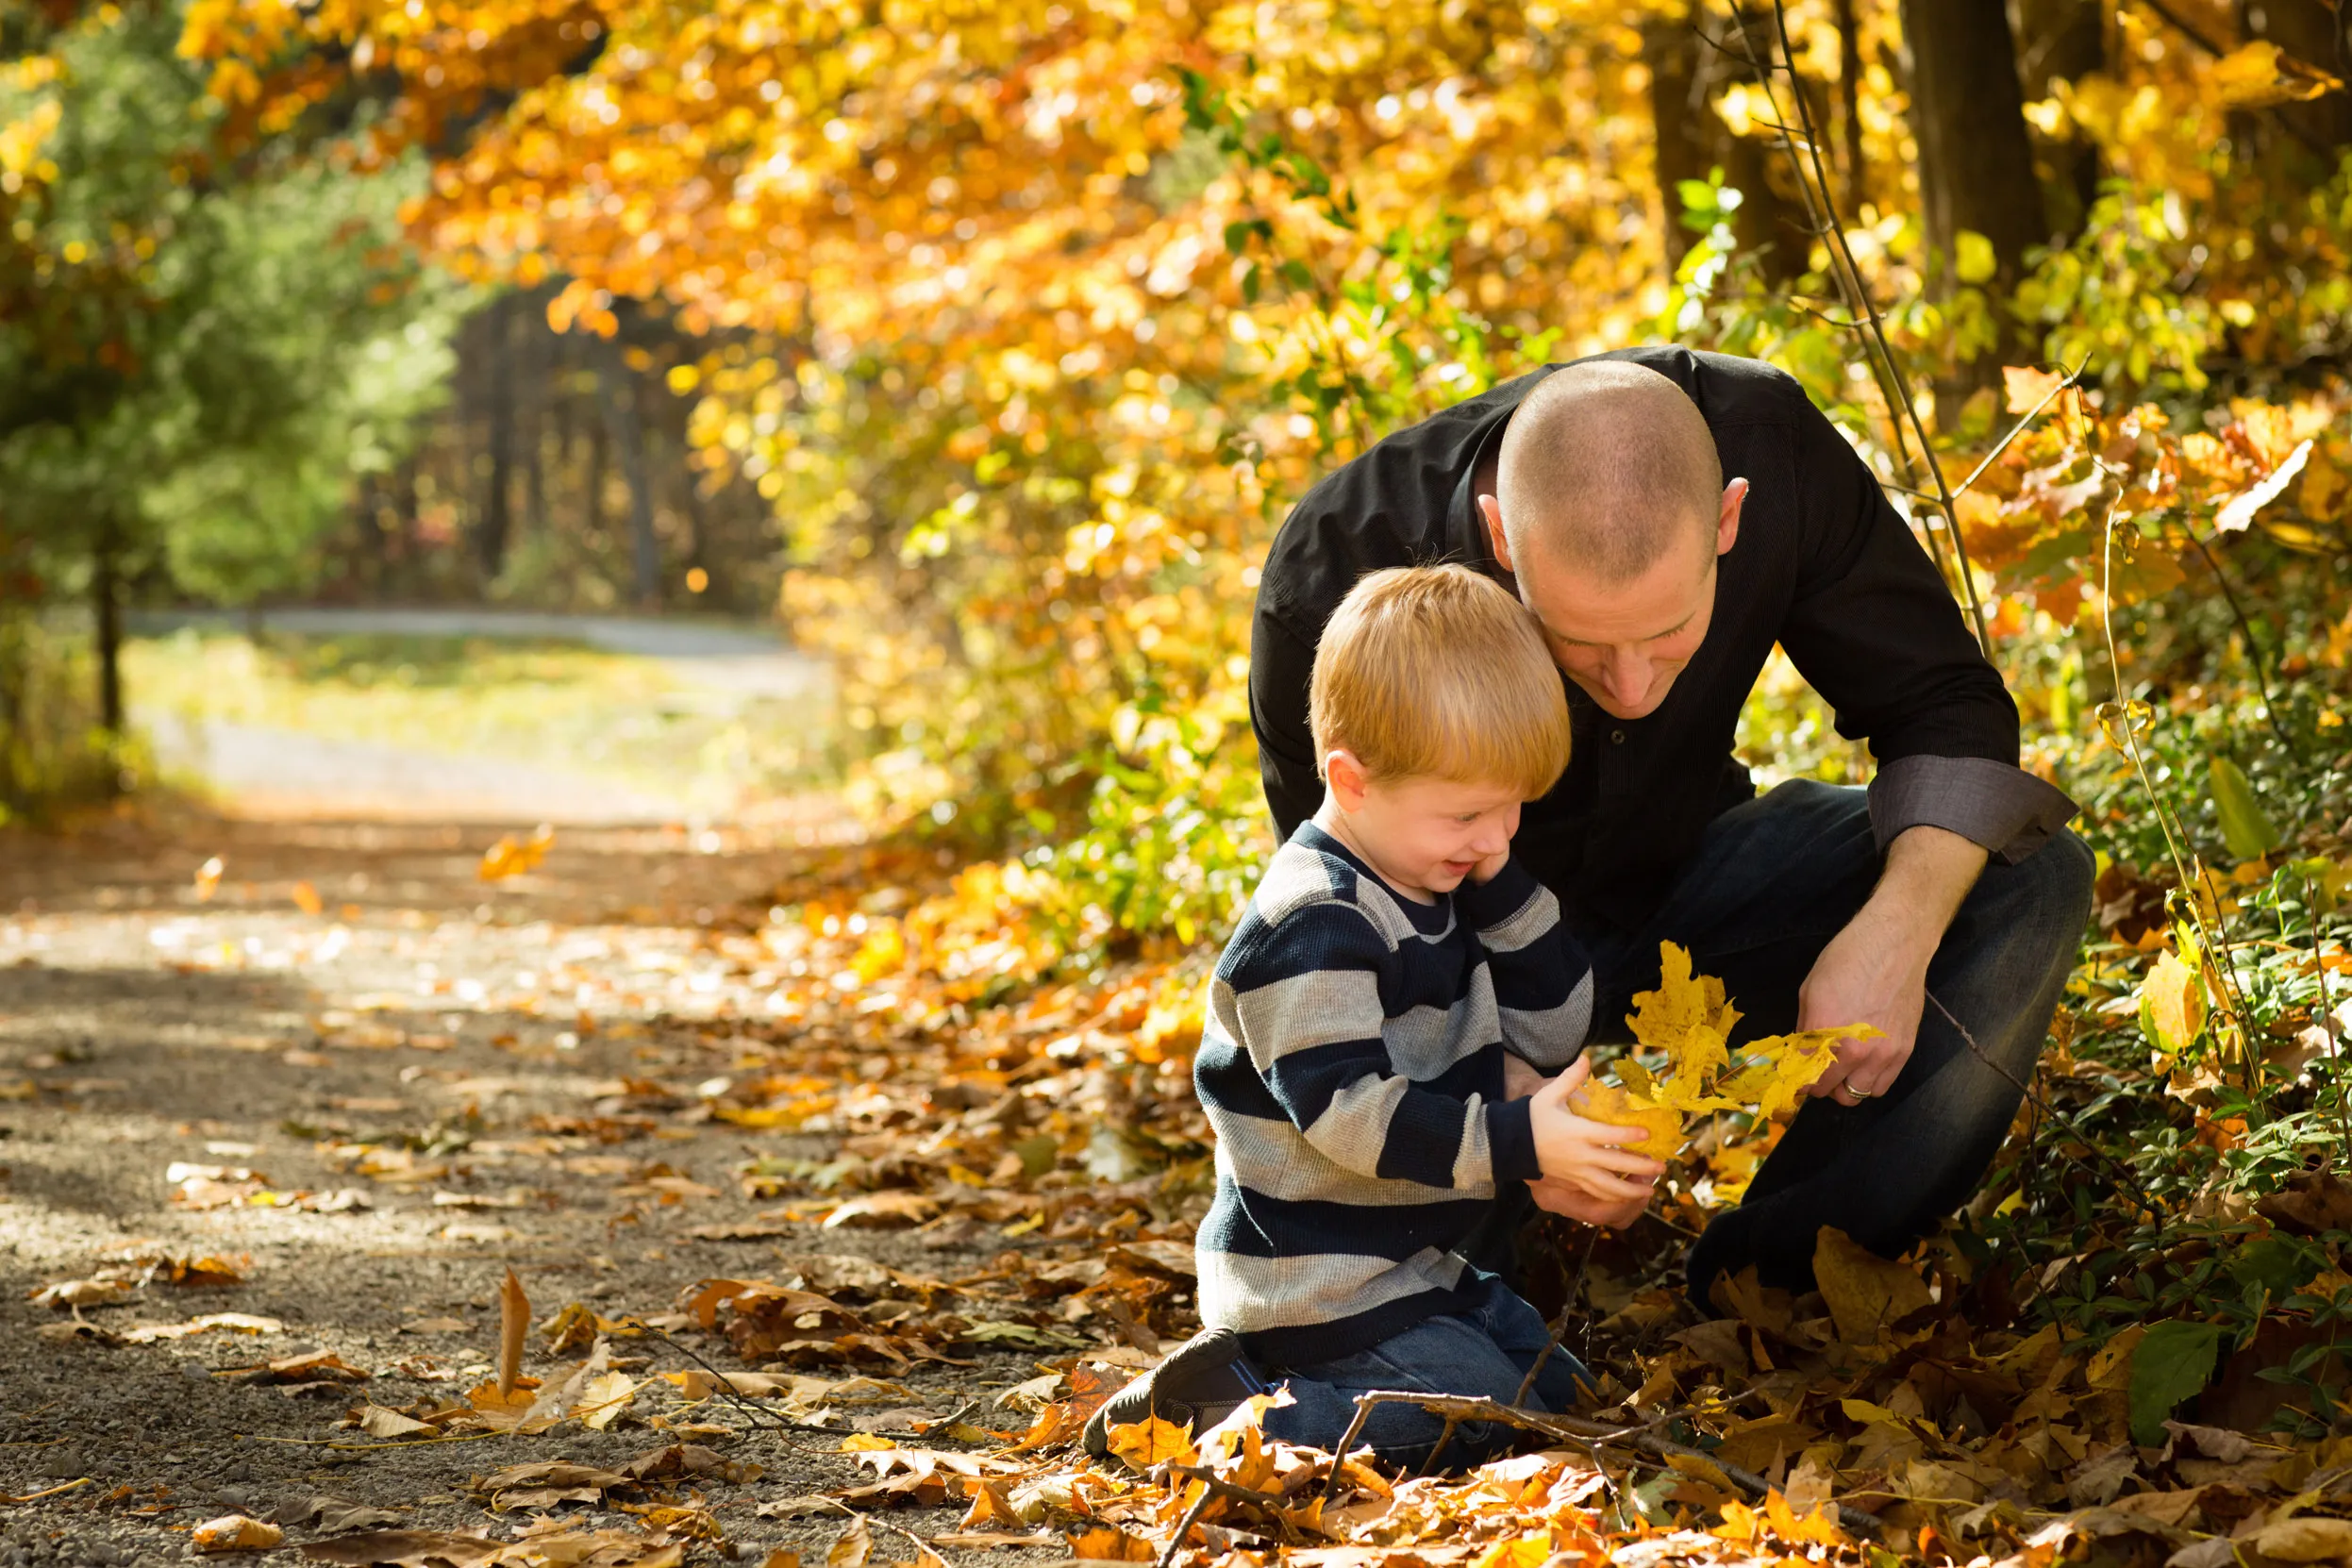 An adult and child knelt on a woodland ground looking at fallen autumn leaves.